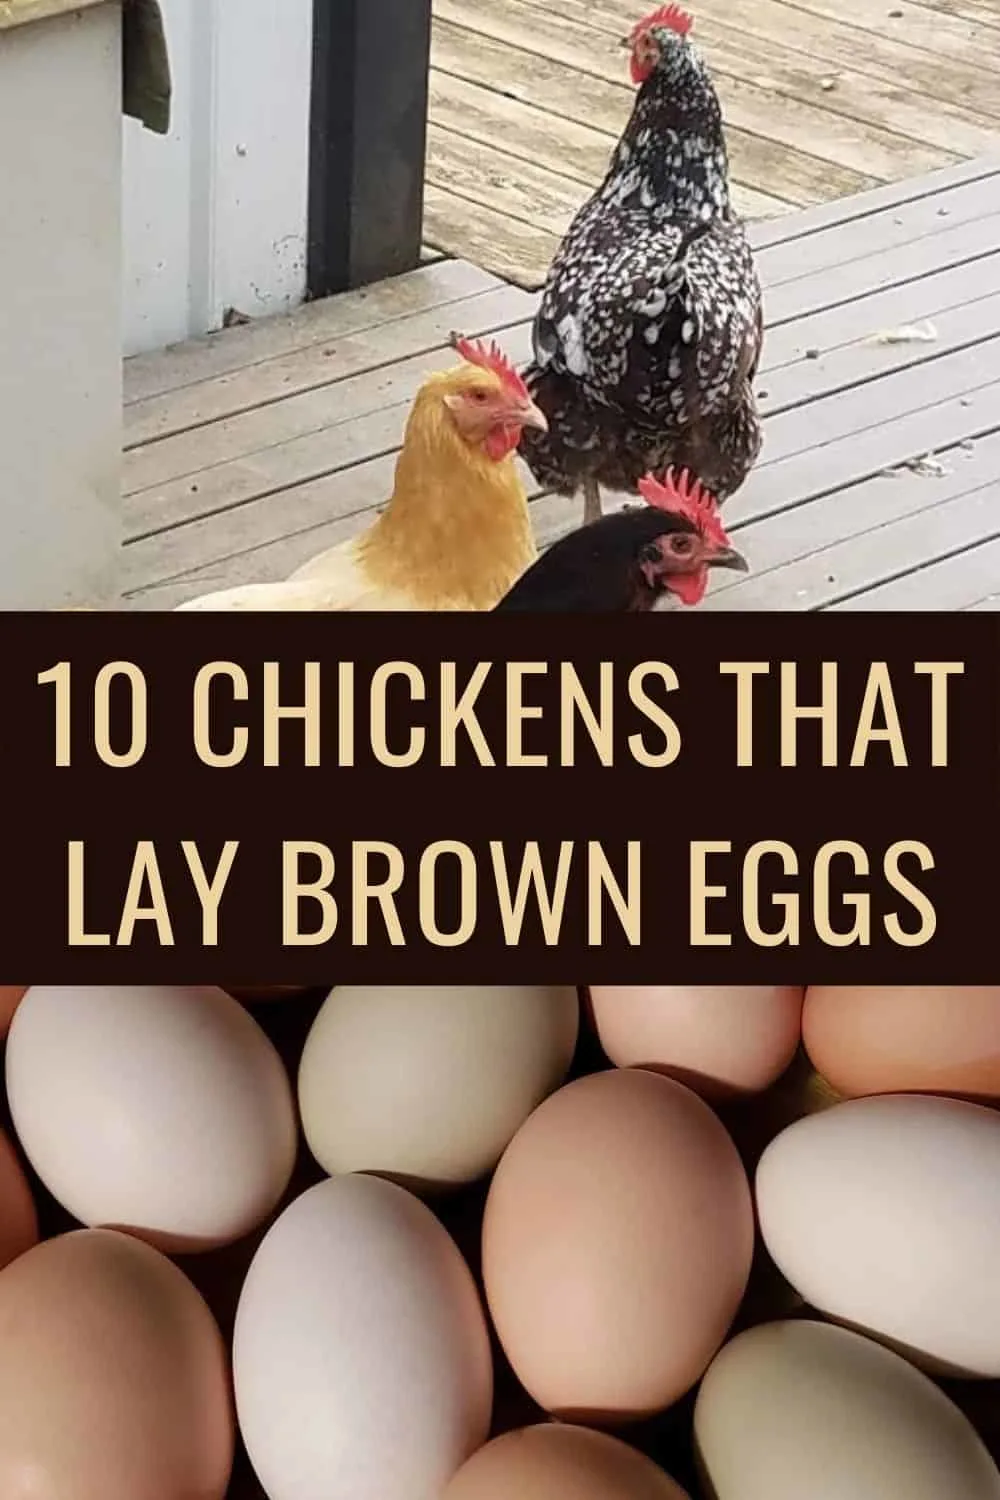 10 chickens that lay brown eggs